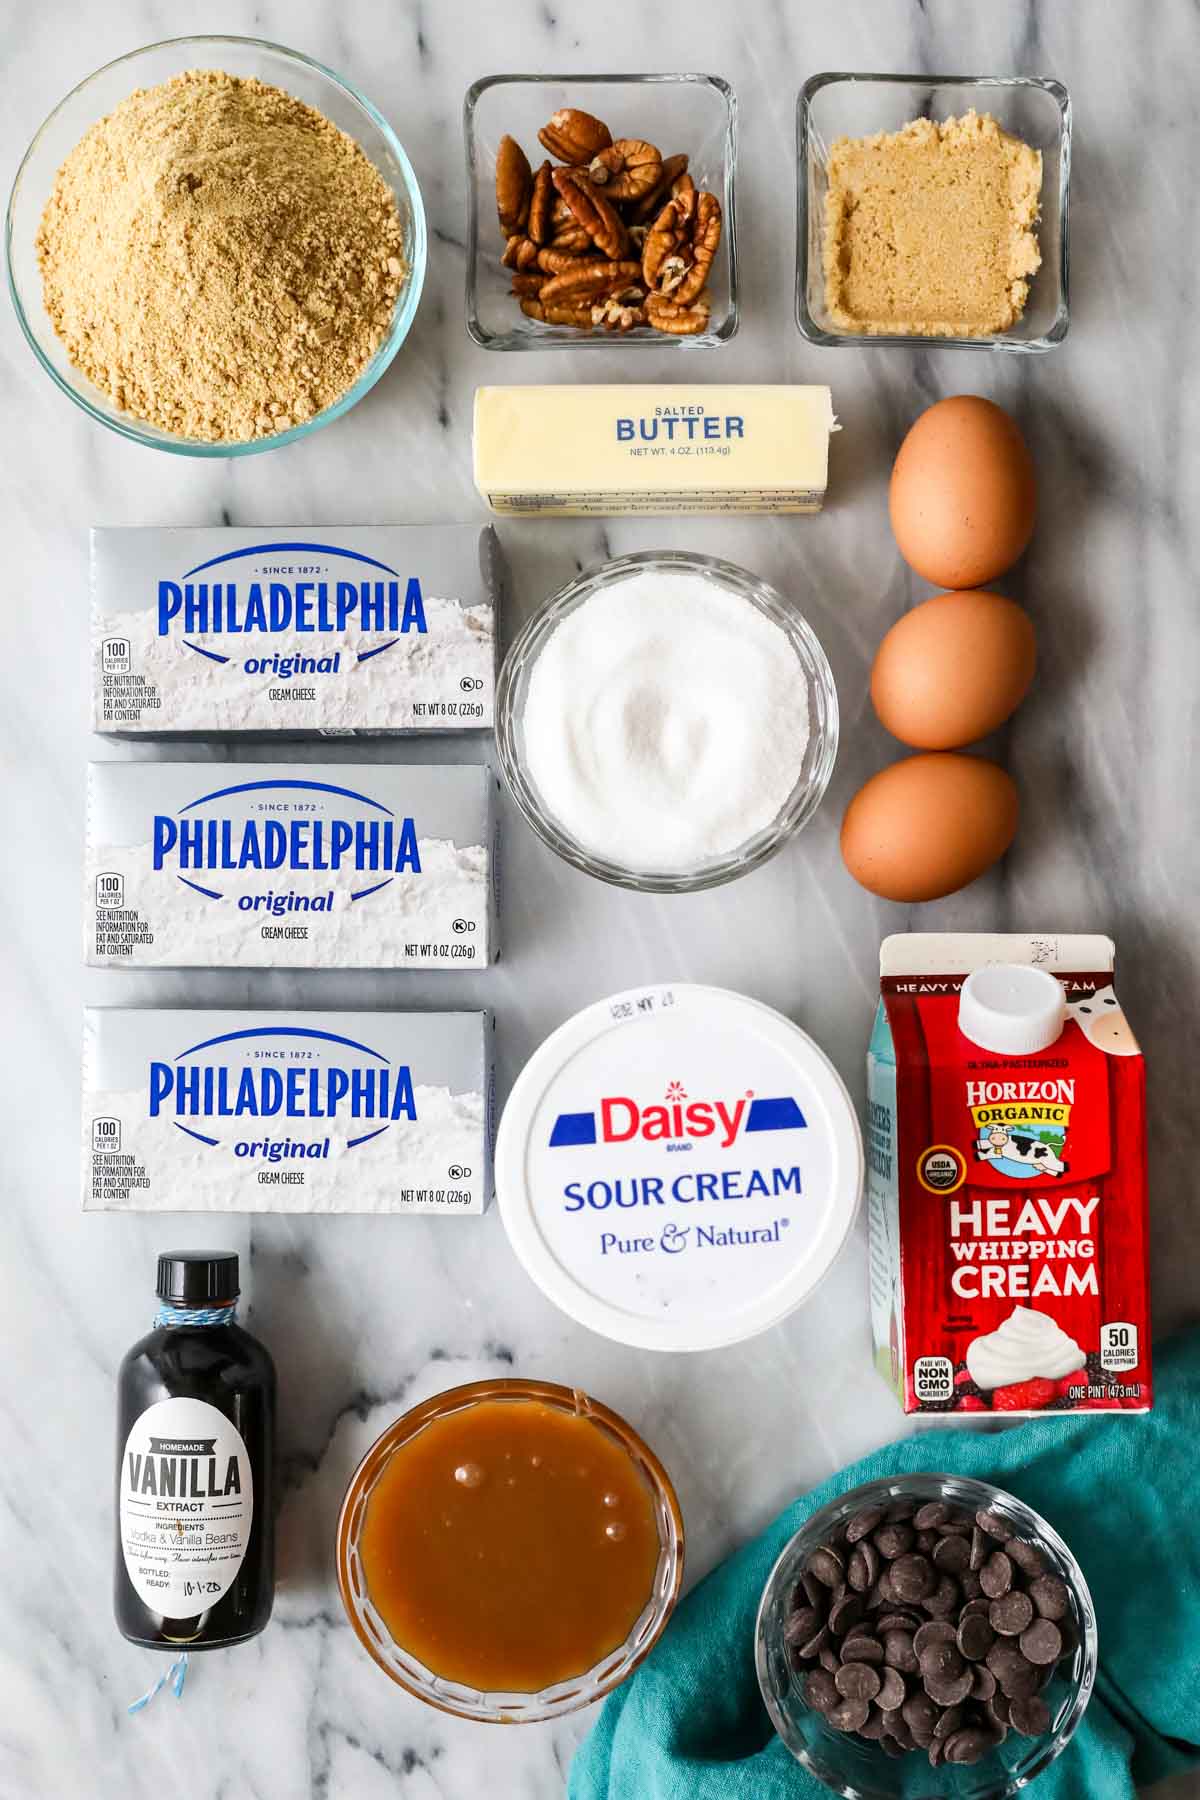 Overhead view of ingredients including cream cheese, pecans, caramel sauce, and more.